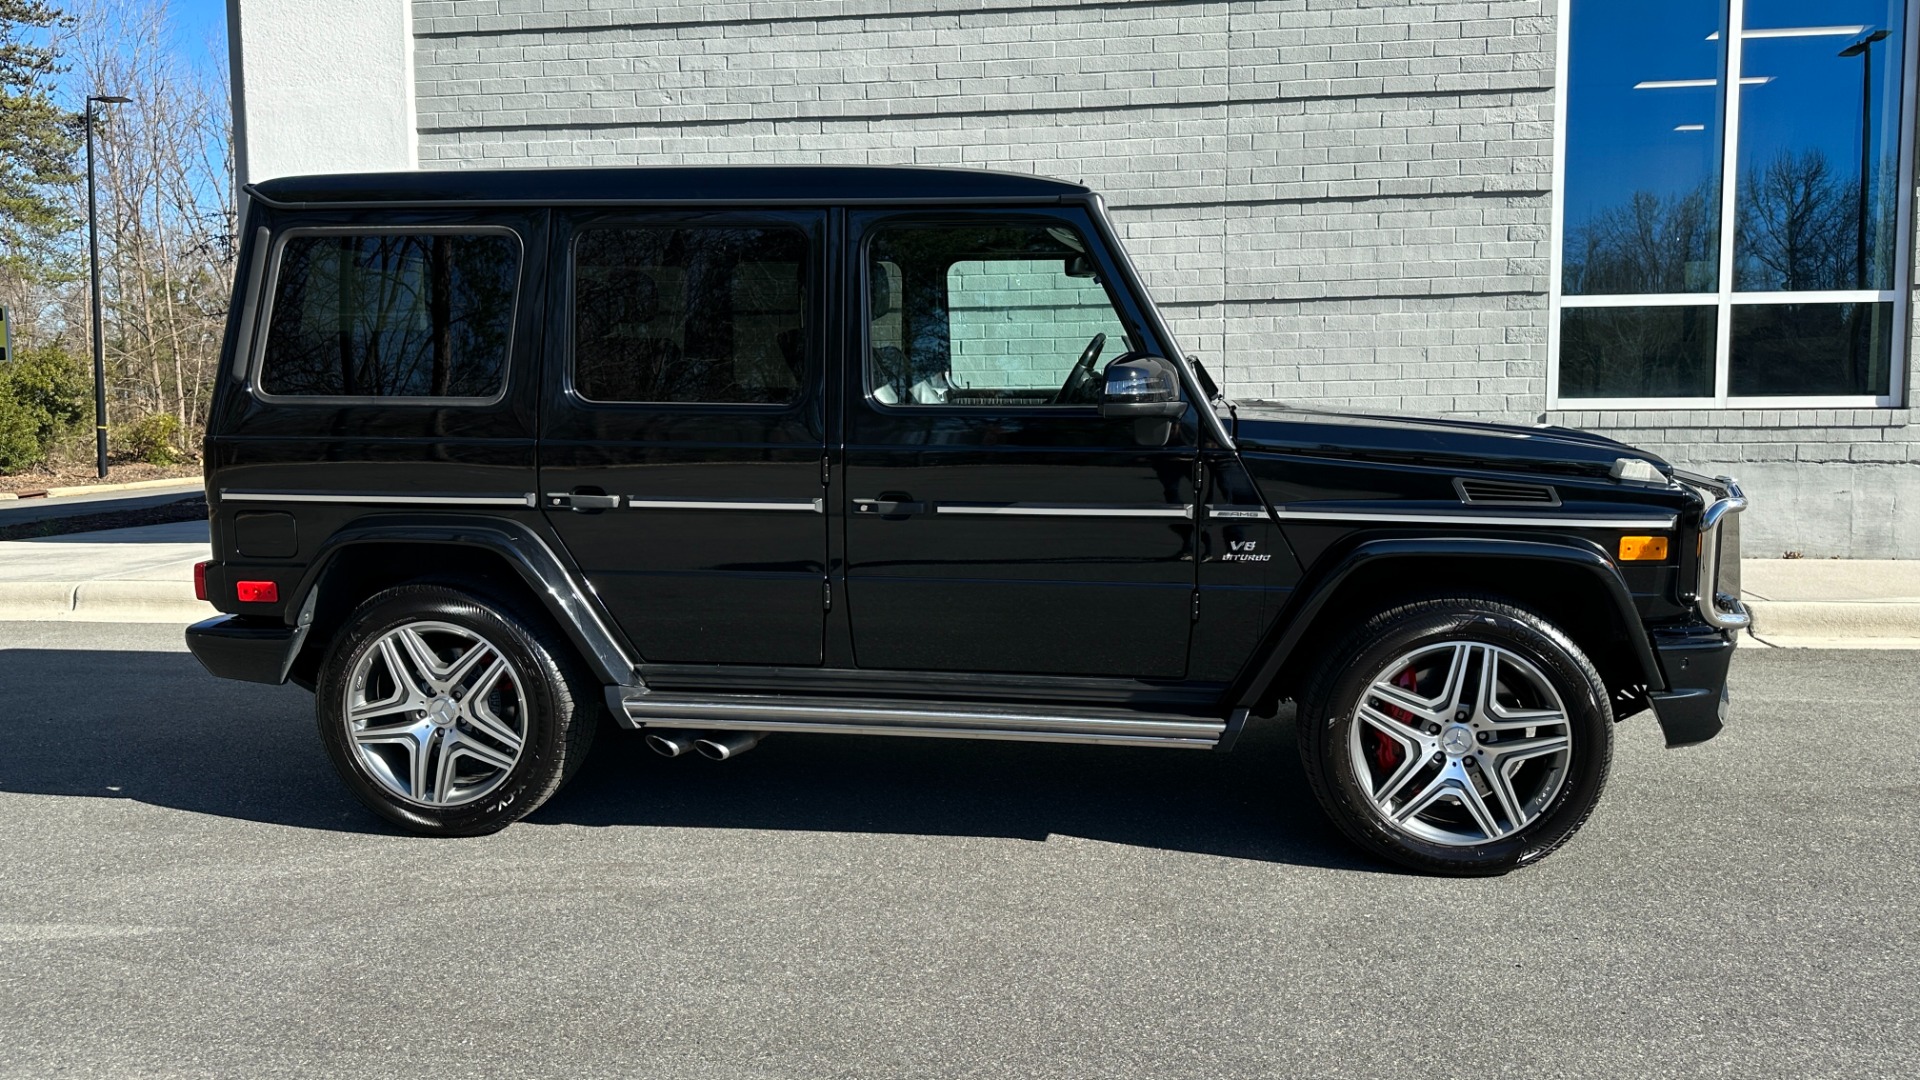 Used 2013 Mercedes-Benz G-Class G63 AMG / DESIGNO INTERIOR / DESIGNO TRIM / 20IN AMG WHEELS for sale $74,995 at Formula Imports in Charlotte NC 28227 7